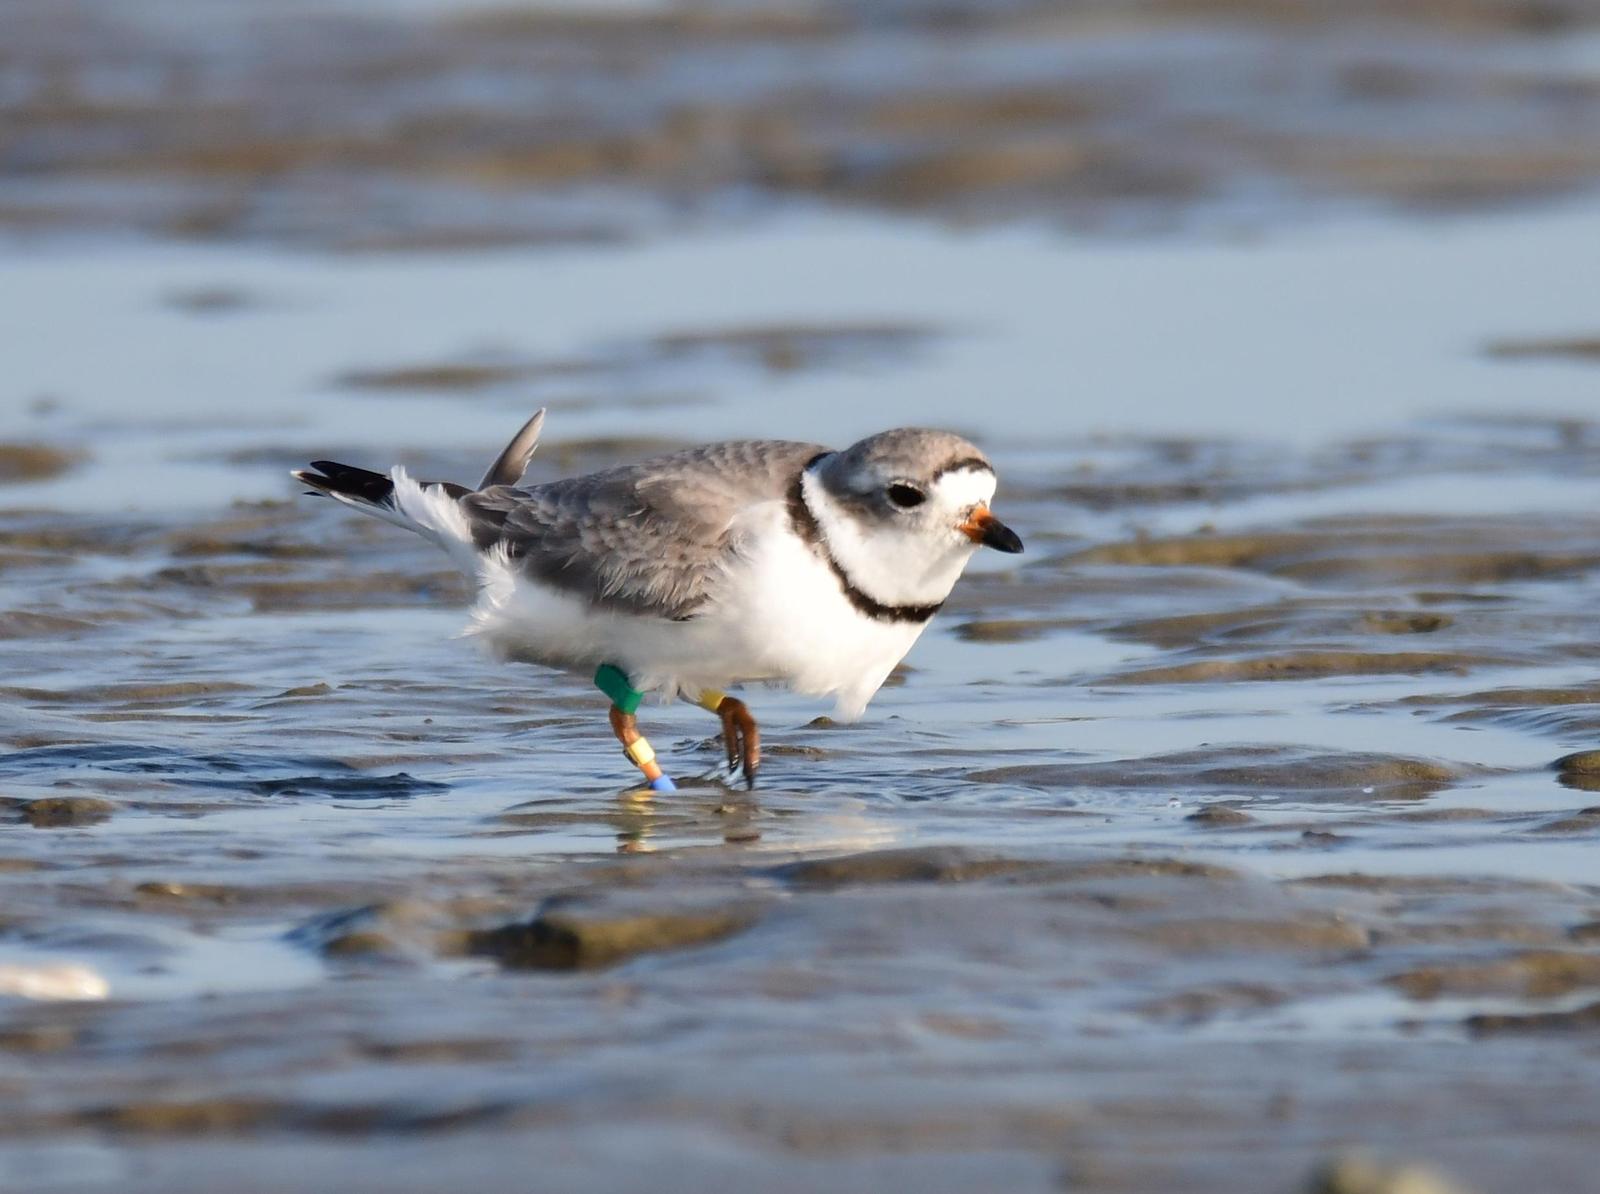 Piping Plover Photo by Jacob Zadik